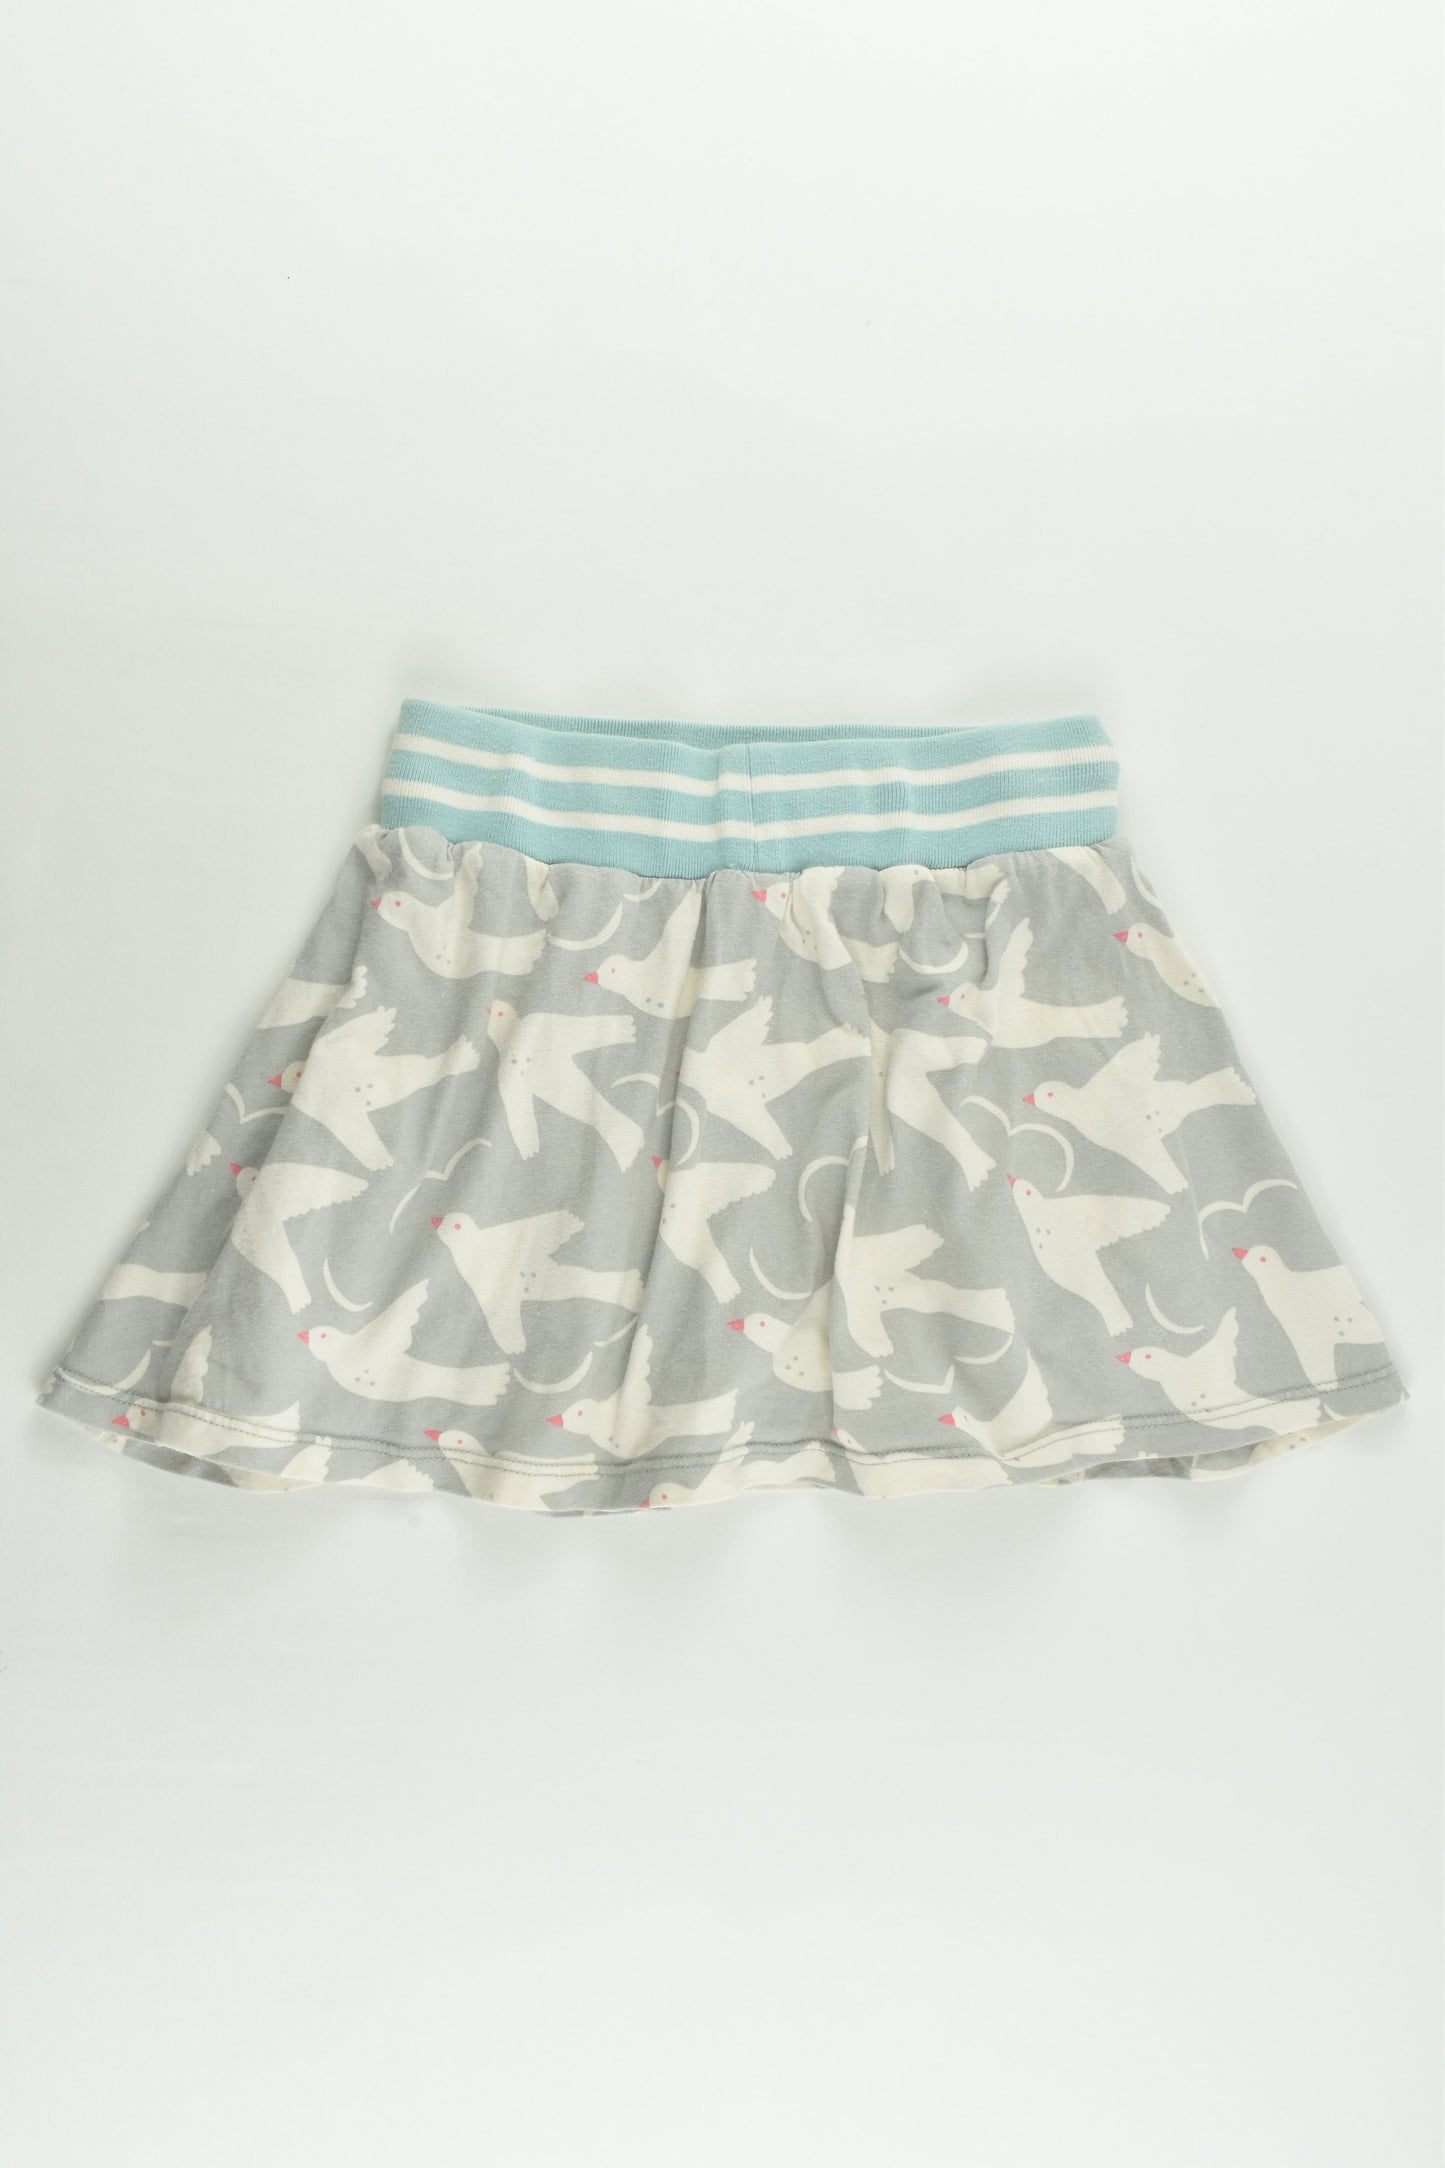 Mini Boden Size 4-5 Birds Skirt with Shorts Underneath